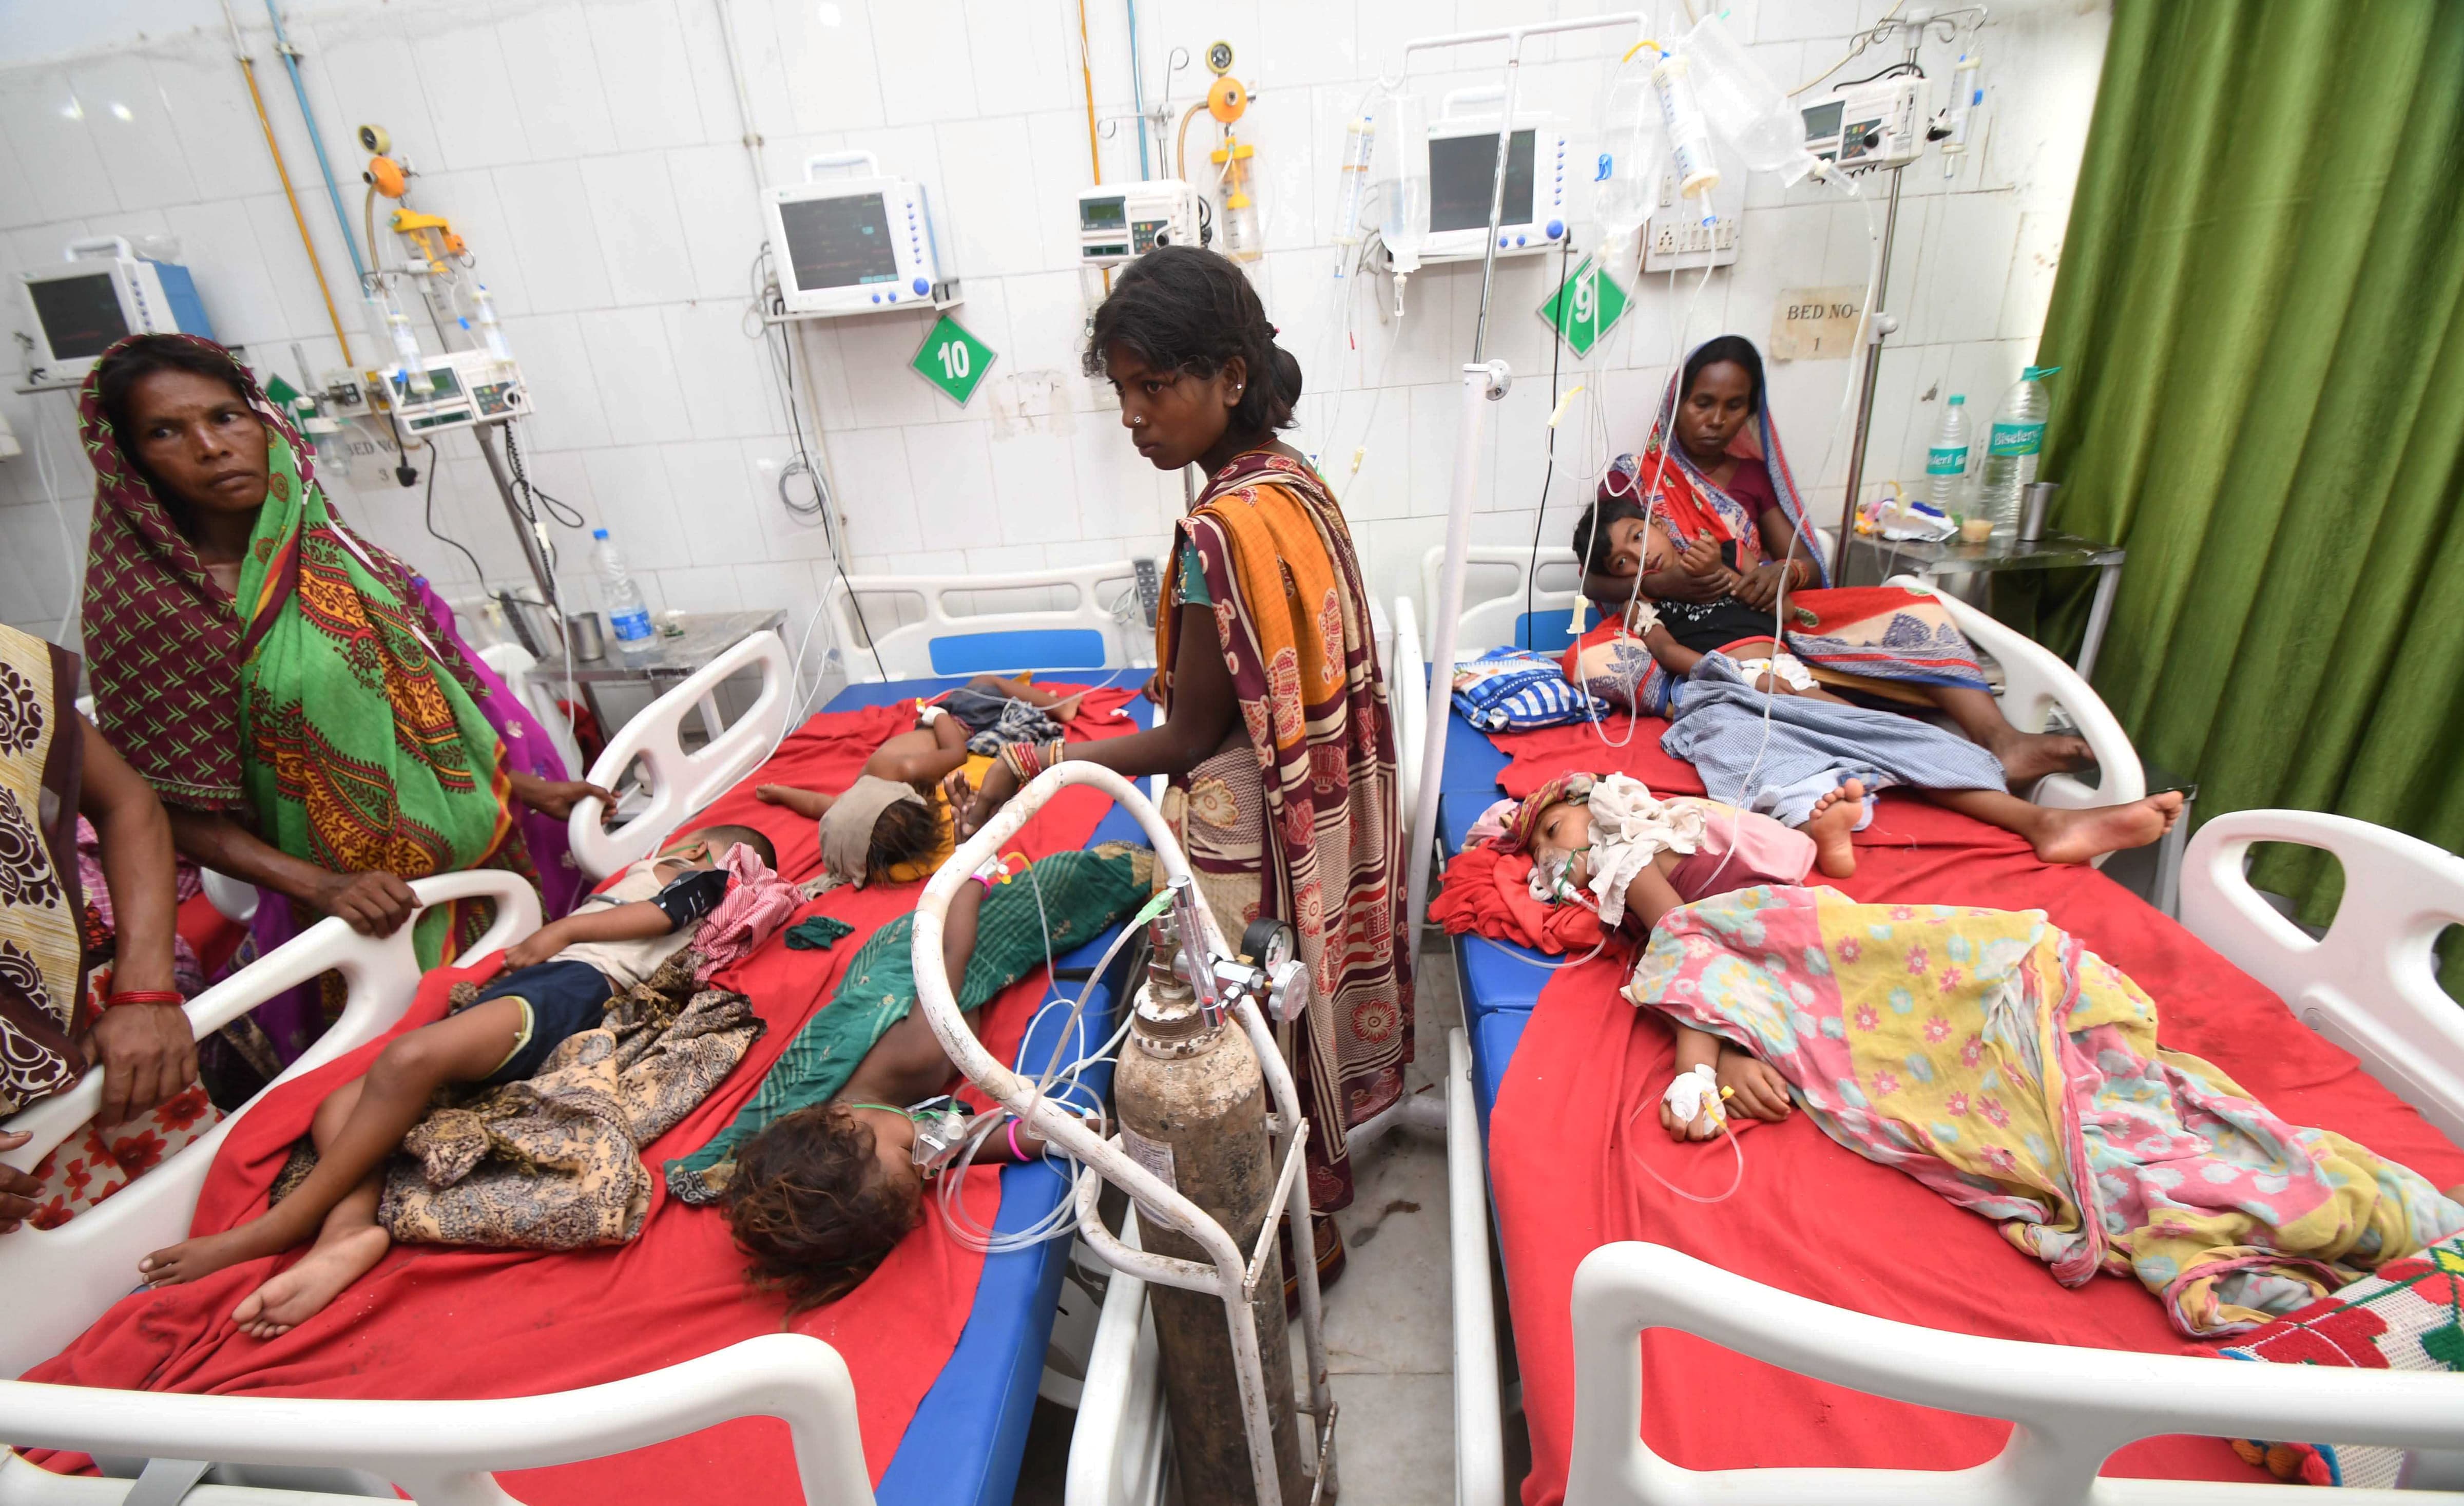 Vardhan assures help to ailing children in Bihar, death toll rises to 93